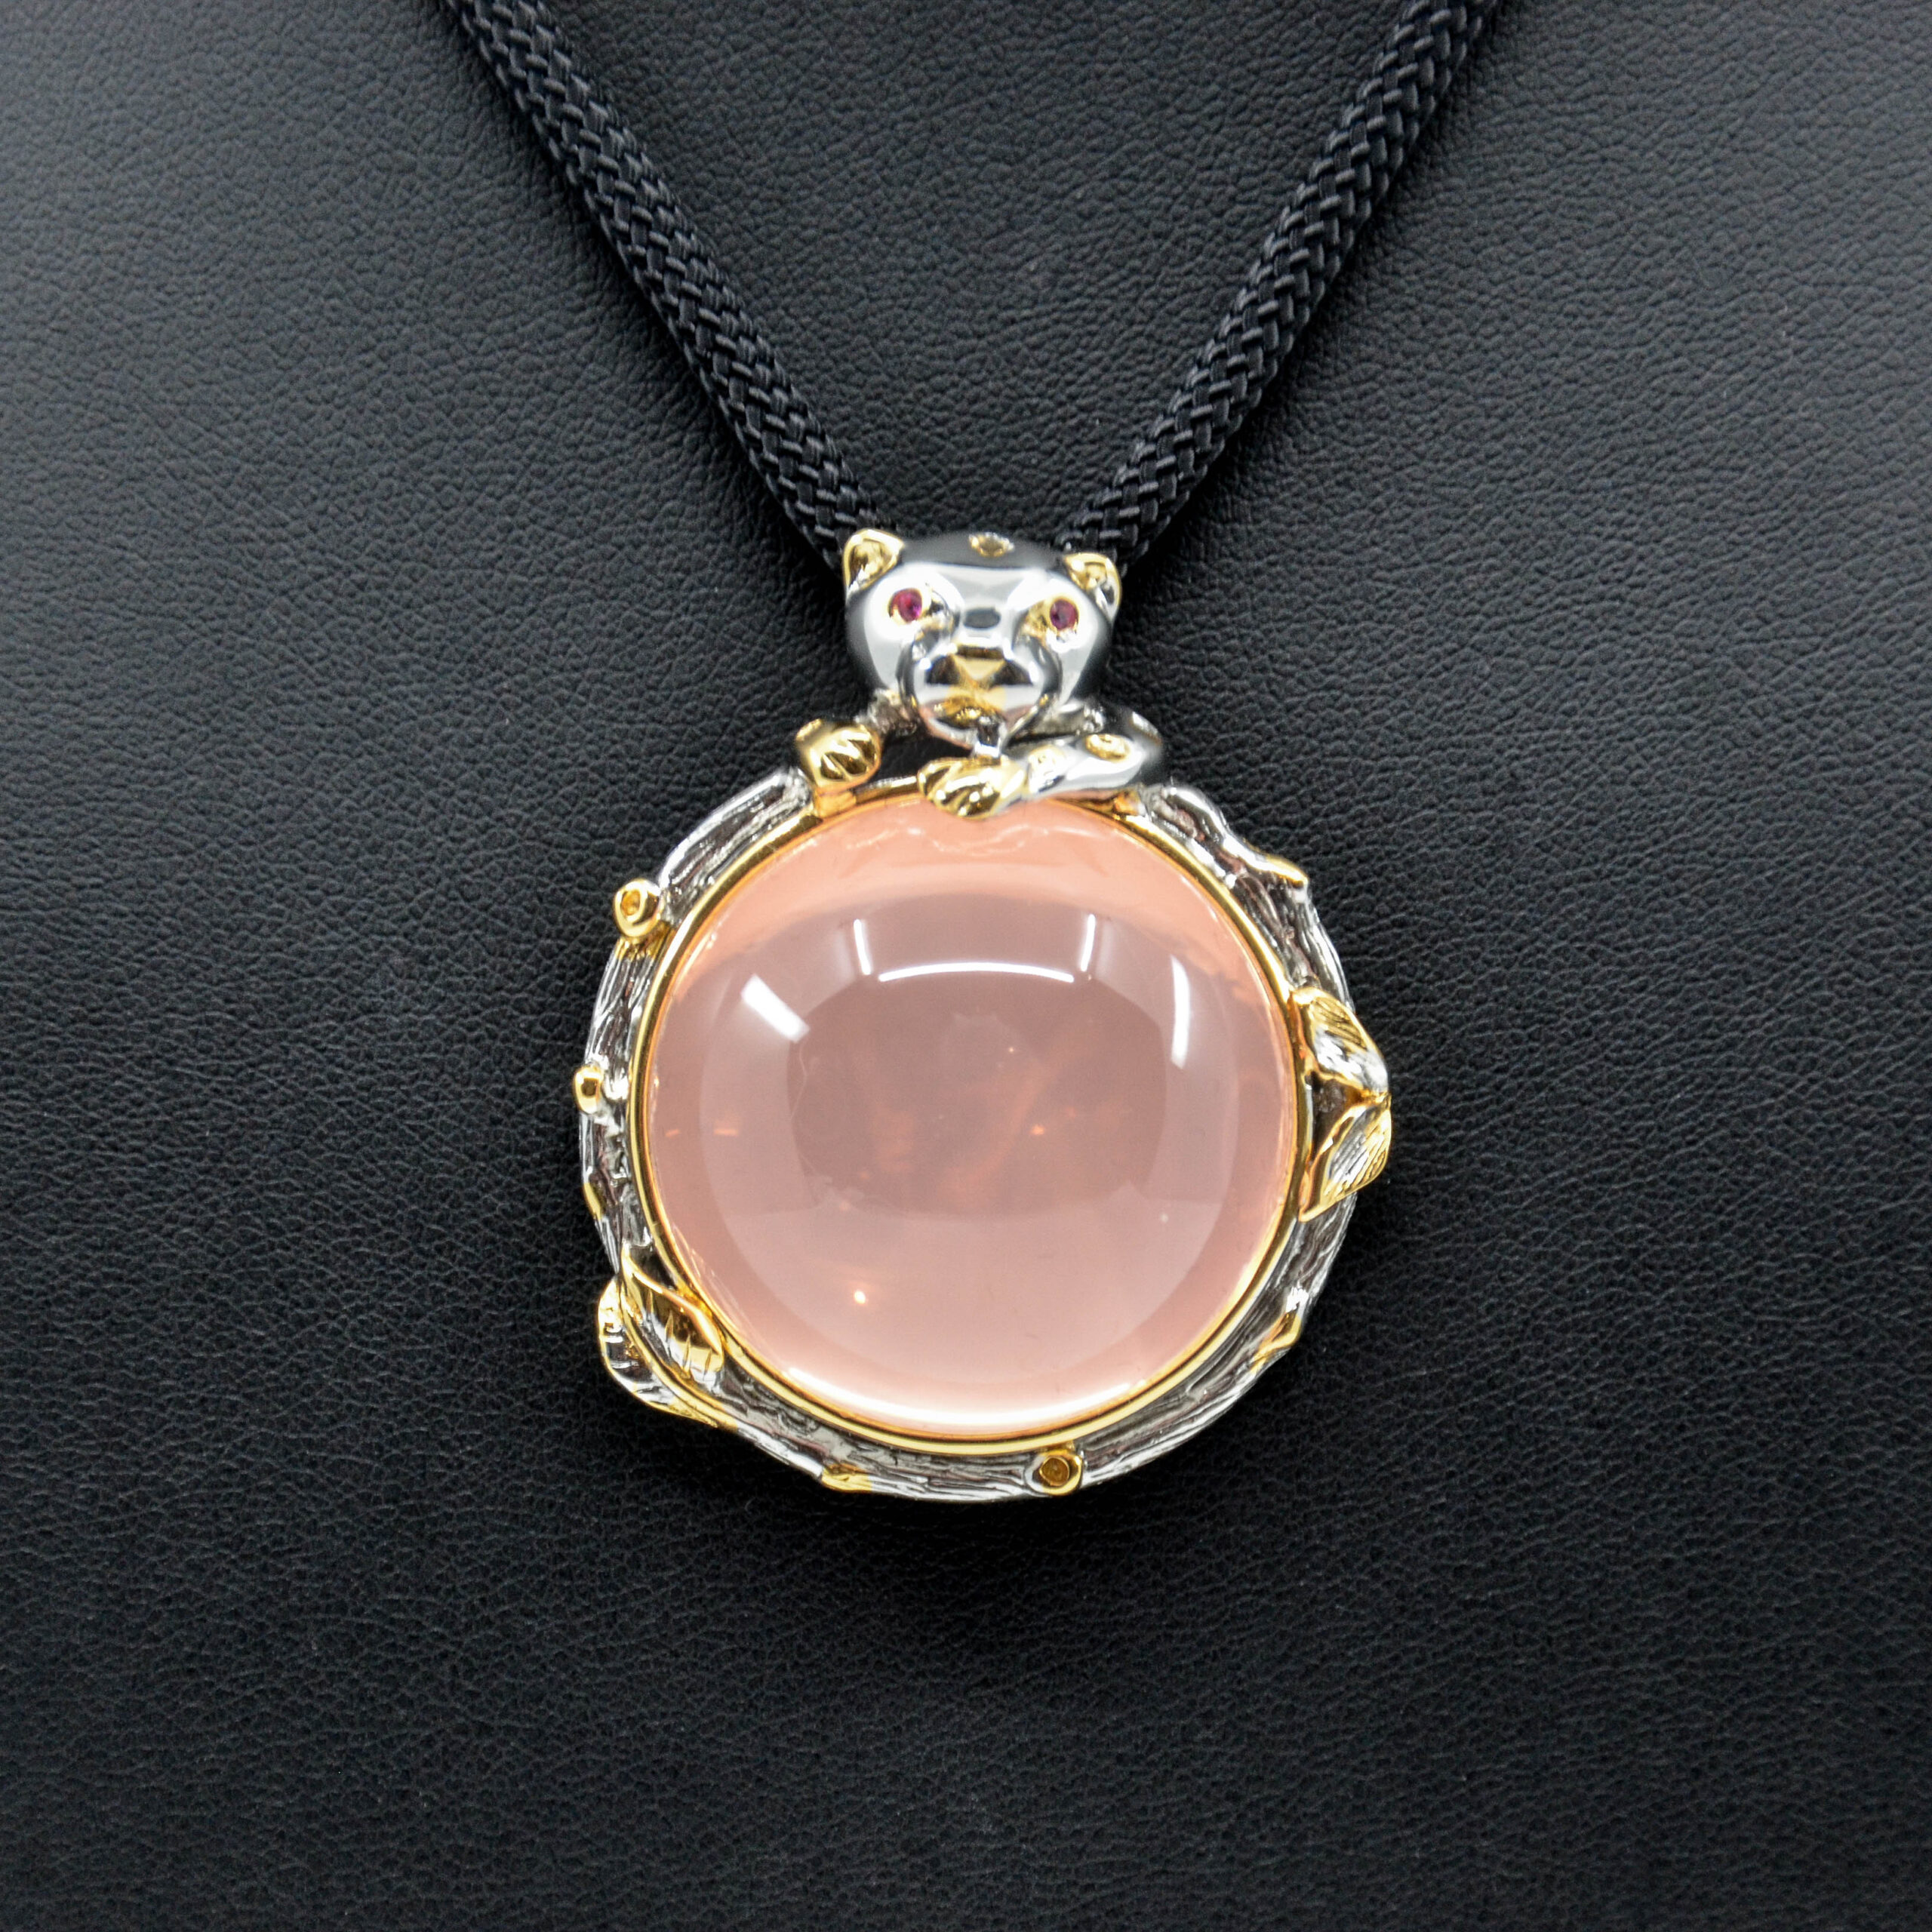 Rare Natural Himalayan Clear Pink Rose Quartz Pendant Necklace with Silver and Gold Colored Metal Setting, Cat Design